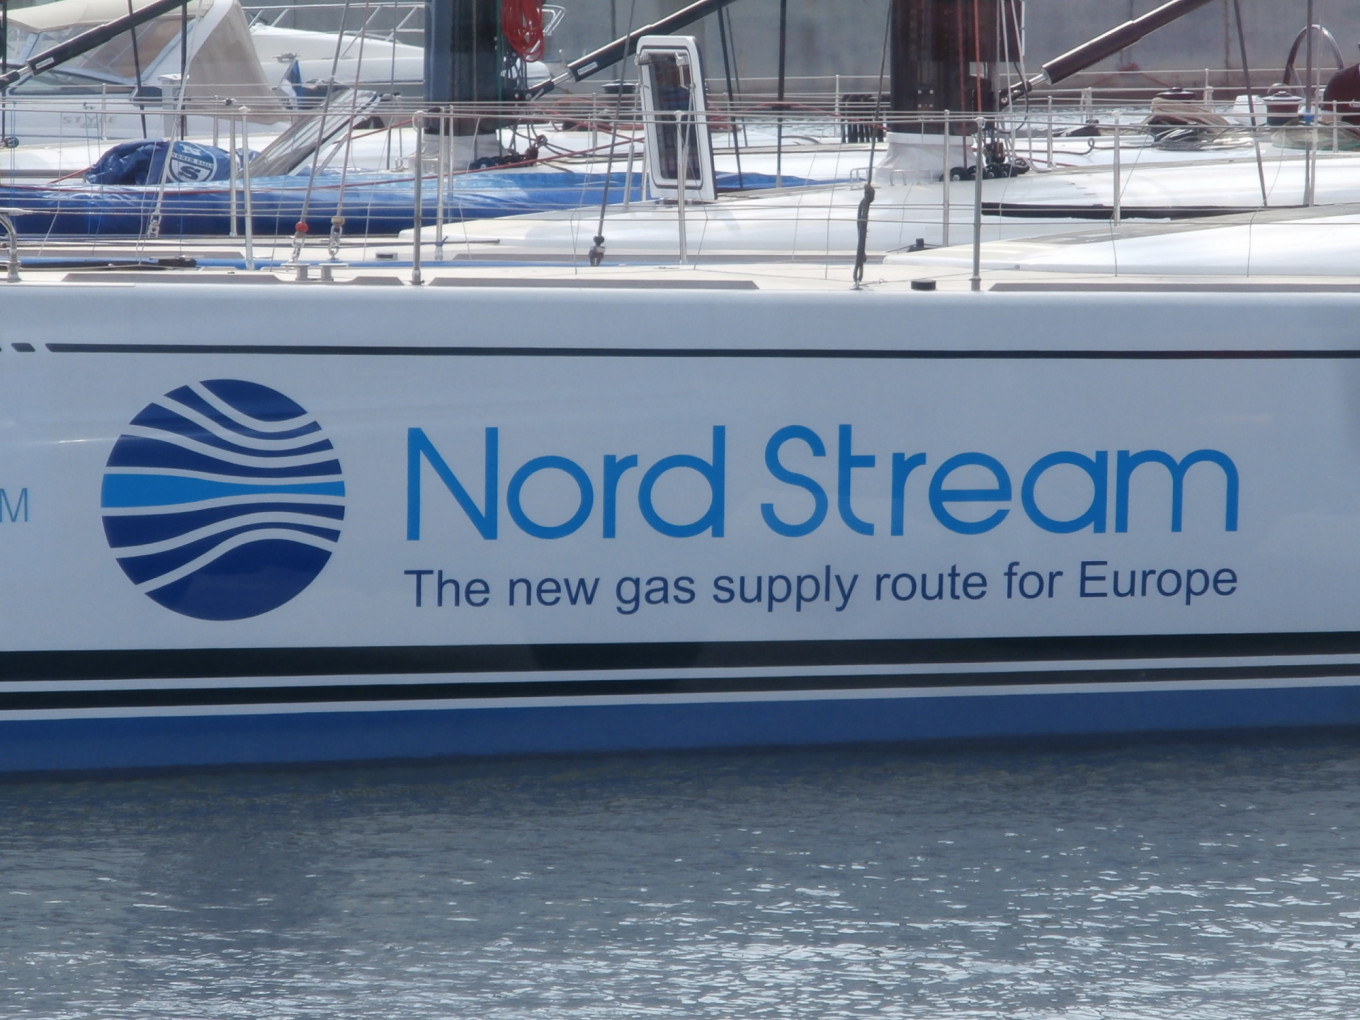 Trump Considers Sanctions on European Firms Over Russia’s Nord Stream 2 Gas Pipeline